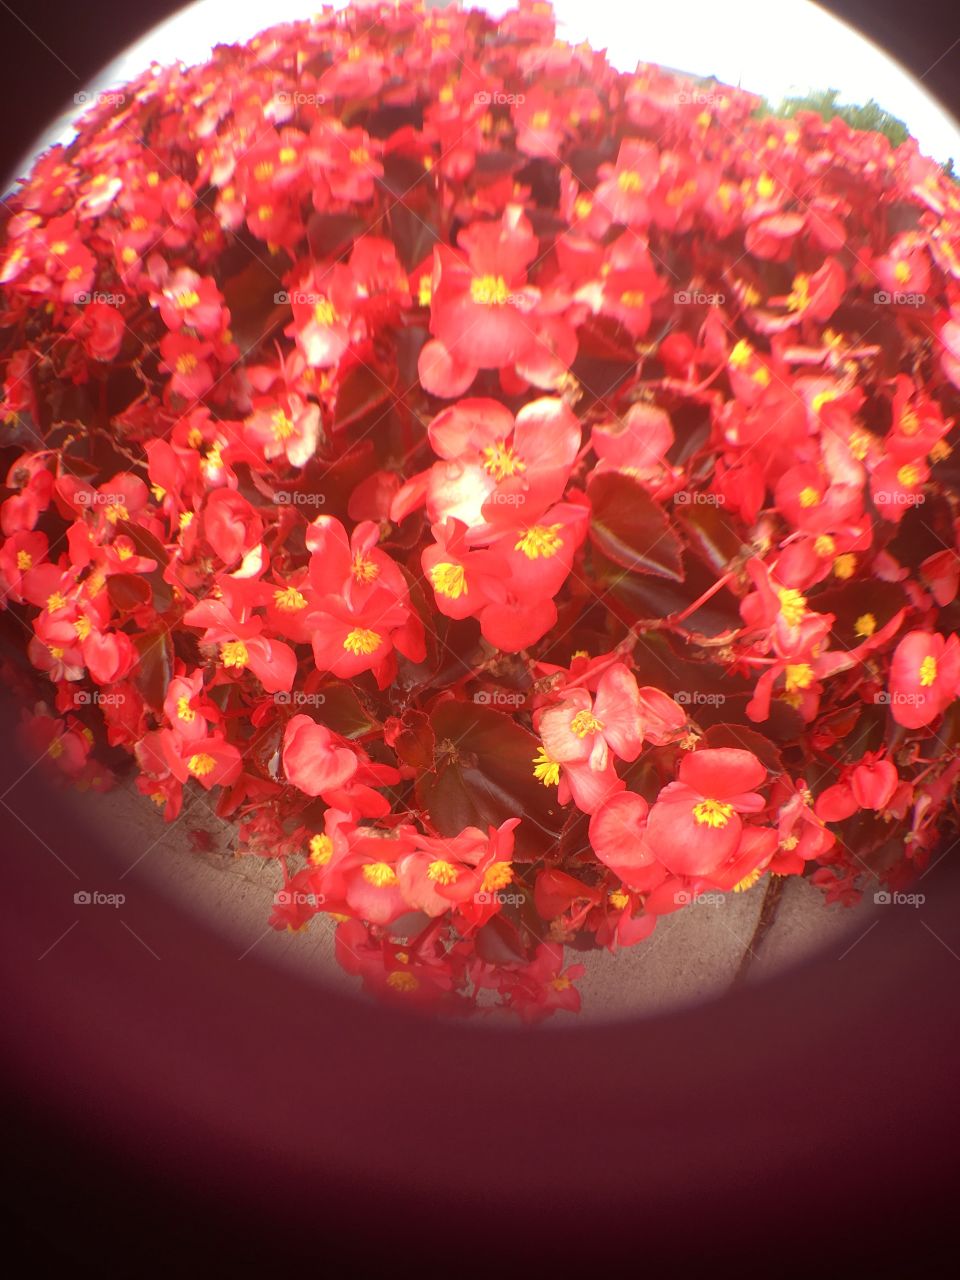 Small red flowers through a fish eye lens.